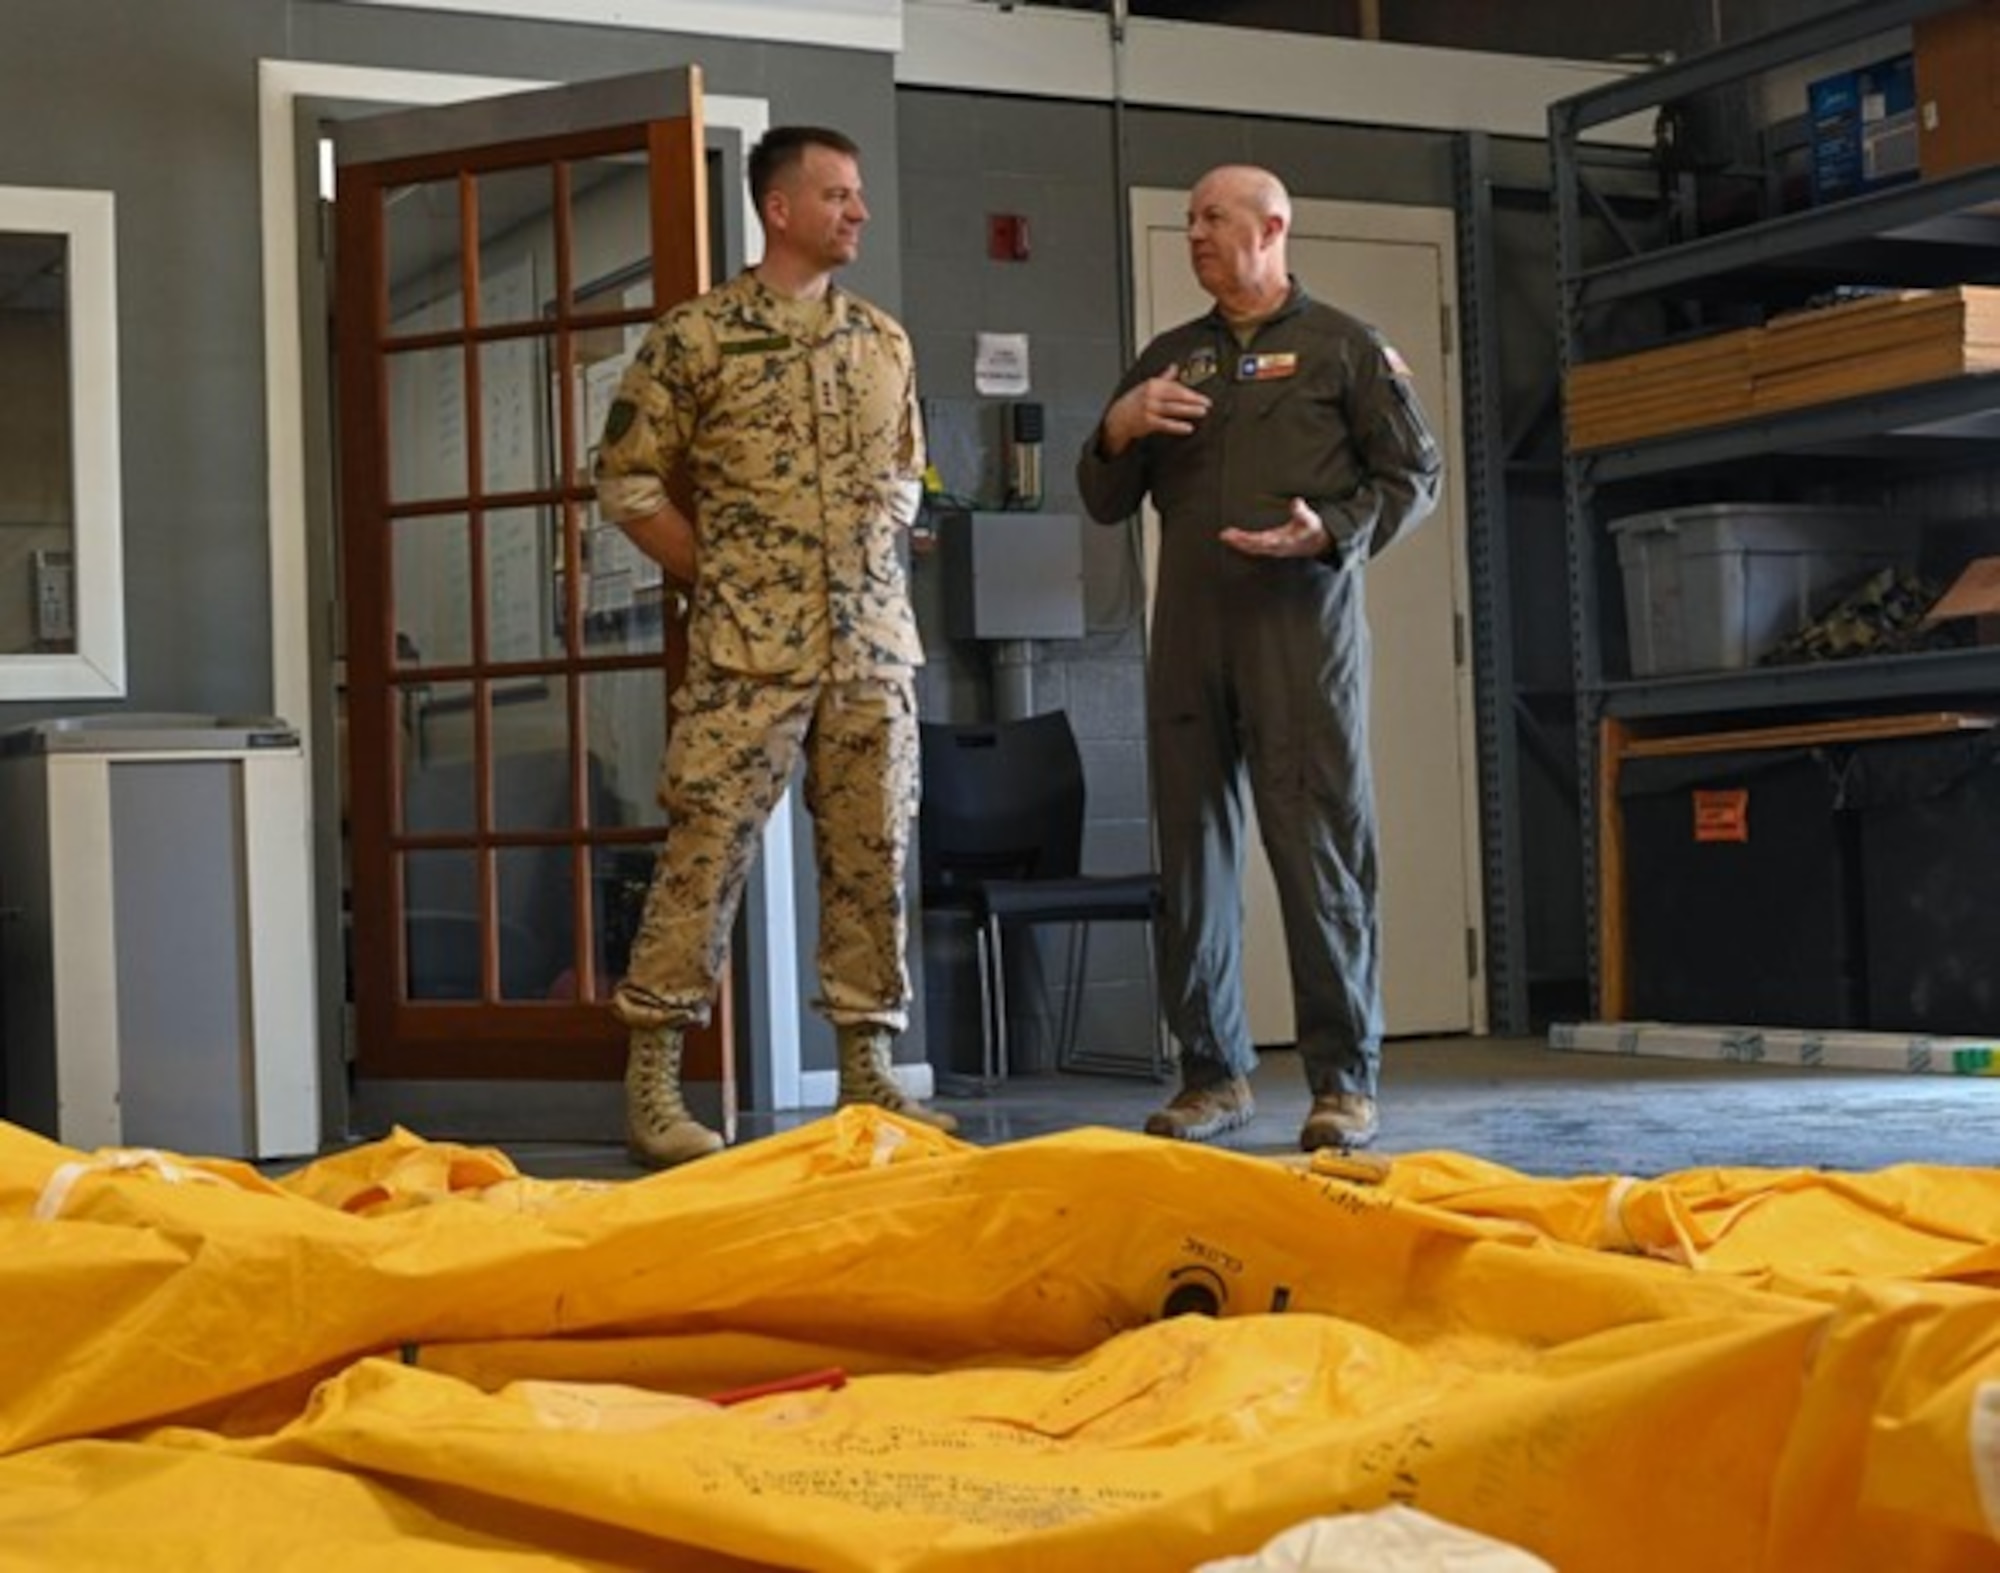 1st Lt. Martti Eerma, left, a reservist from the Estonia Defense Force, listens to U.S. Air Force Col. James Miller, right, 433rd Operations Group commander, as he talks about training priorities for survival, evasion, resistance, and escape training in front of a 25-man survival raft at Joint Base San Antonio- Lackland, Texas, May 29, 2023. The exchange program encouraged reservists to exchange forces to improve NATO interoperability through an official agreement with the Estonian Embassy in Washington, D.C., on Feb.10, 2015. (U.S. Air Force photo by Staff Sgt. Adriana Barrientos)